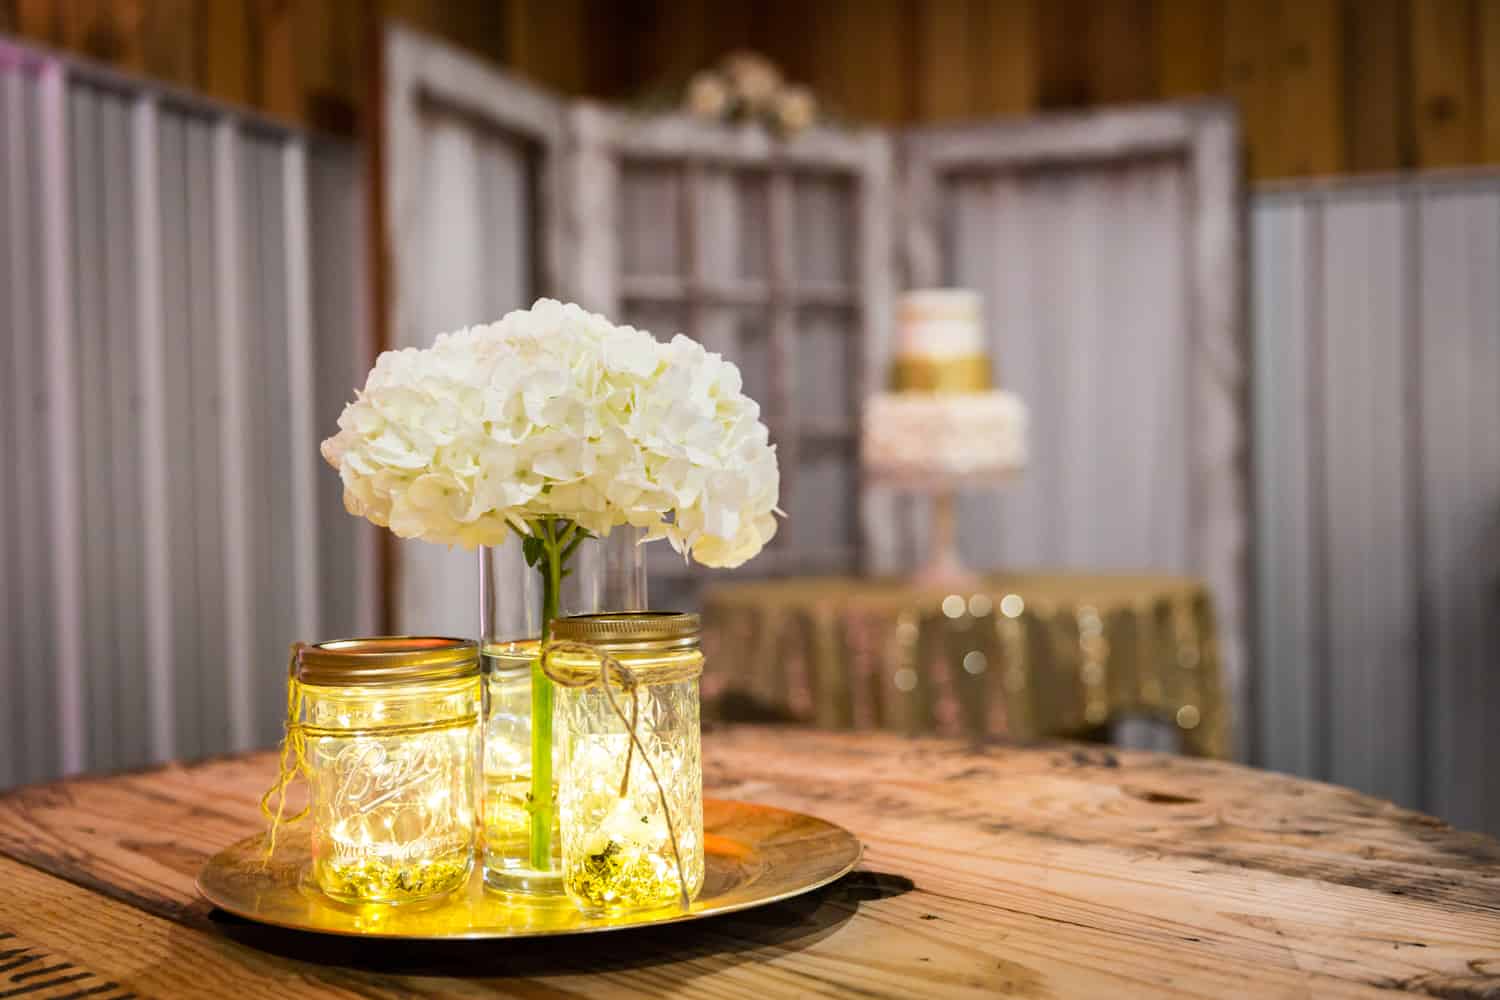 Tray of mason jars filled with fairy lights and vase of white hydrangeas